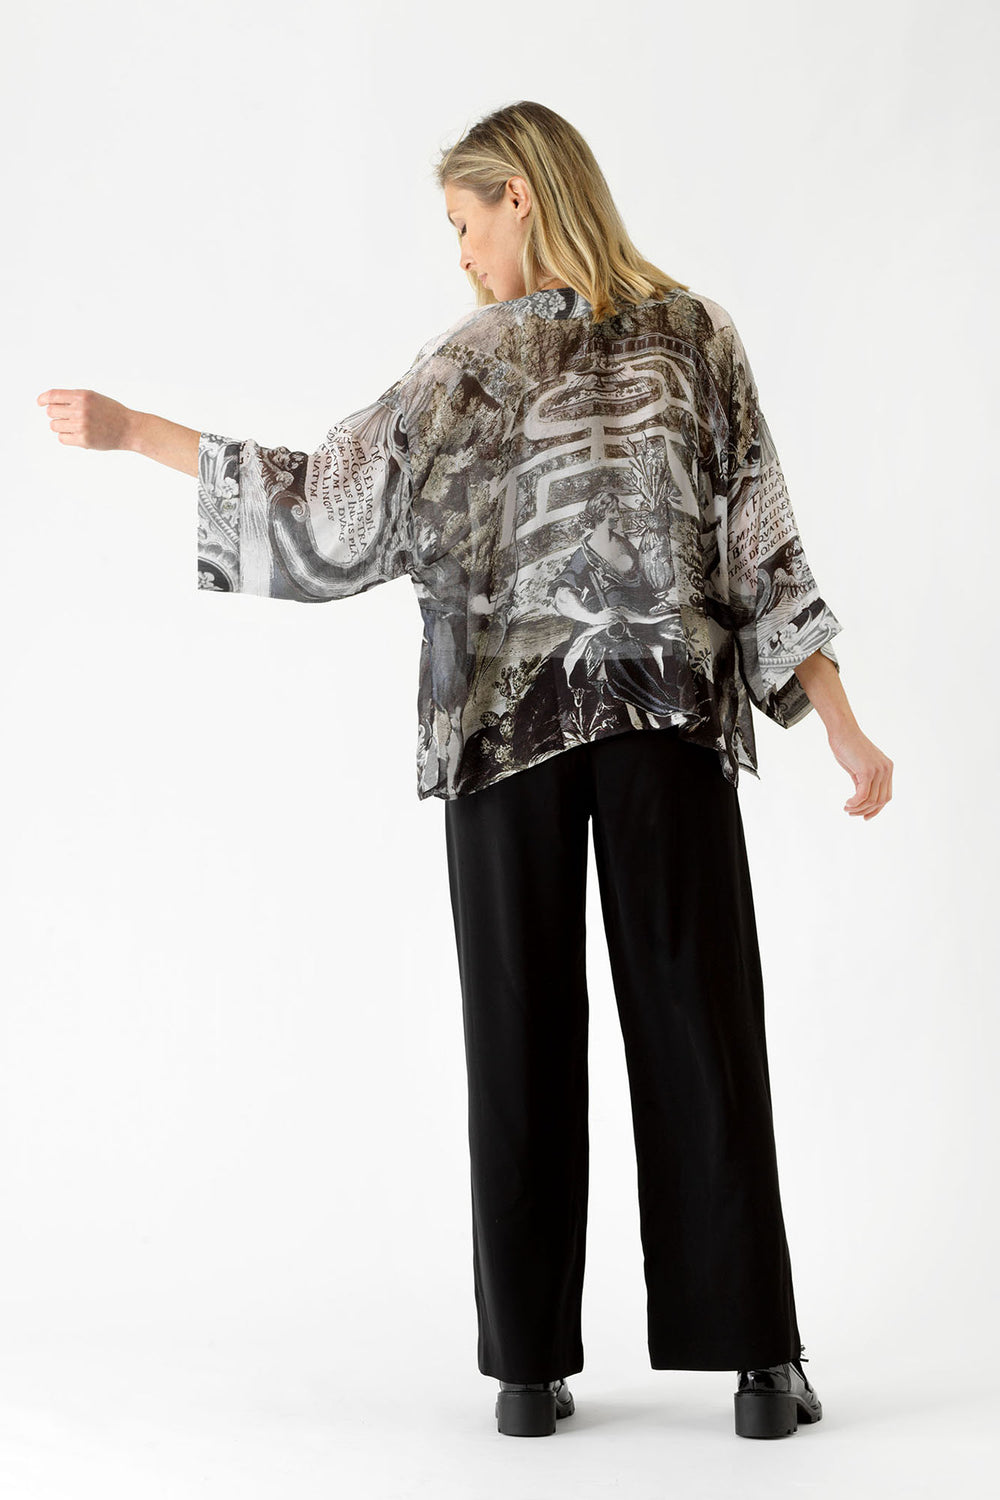 ladies short kimono jacket winter design coloured in tones of black, grey and subtle green print by One Hundred Stars